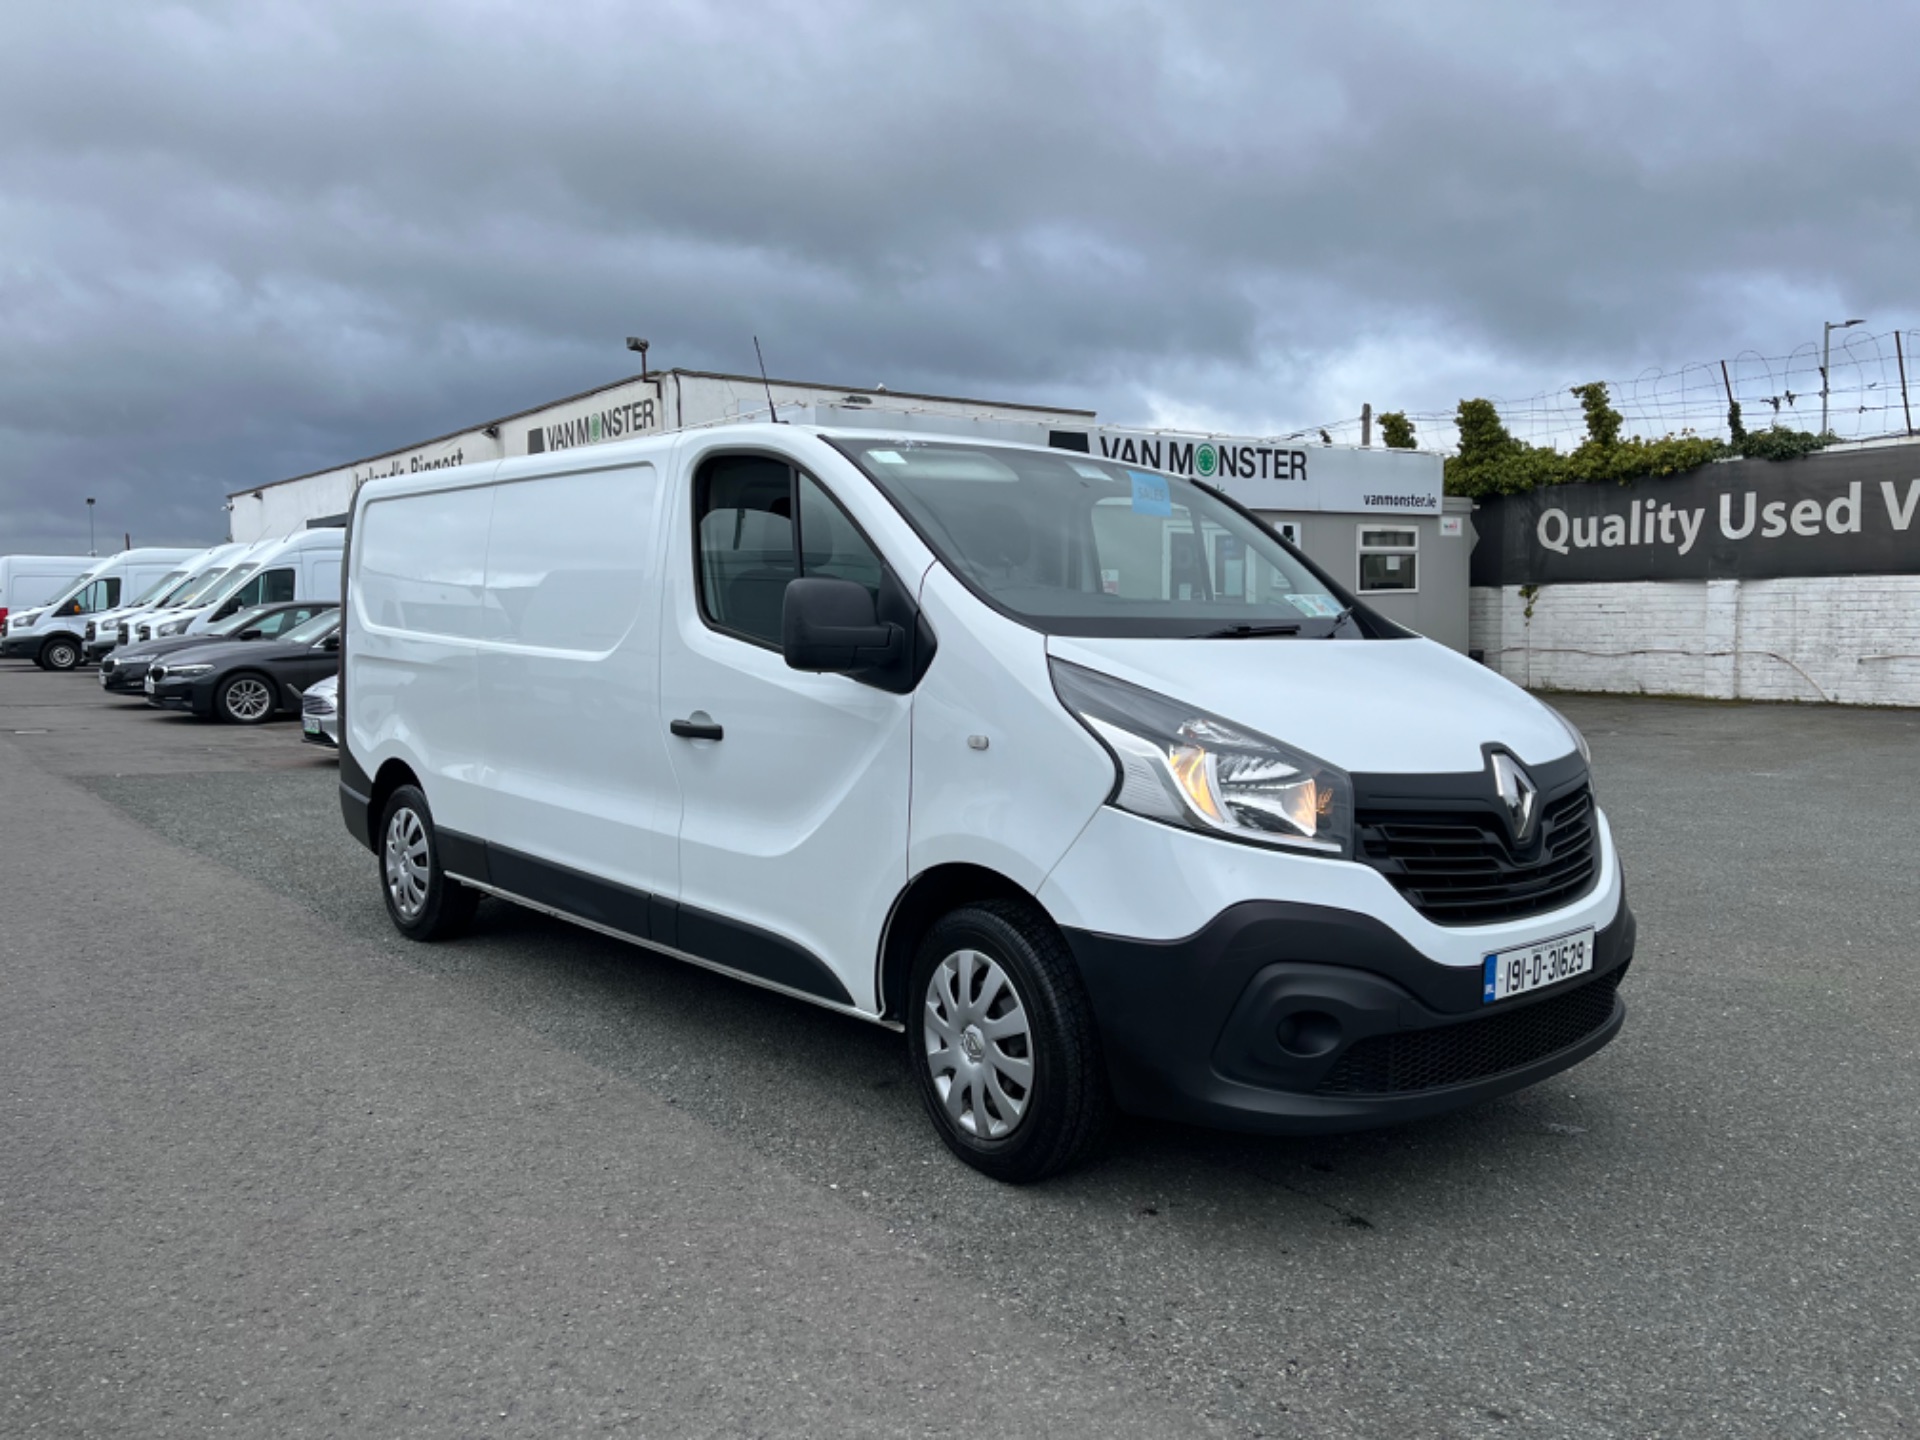 2019 Renault Trafic LL29 DCI 120 Business (191D31629)